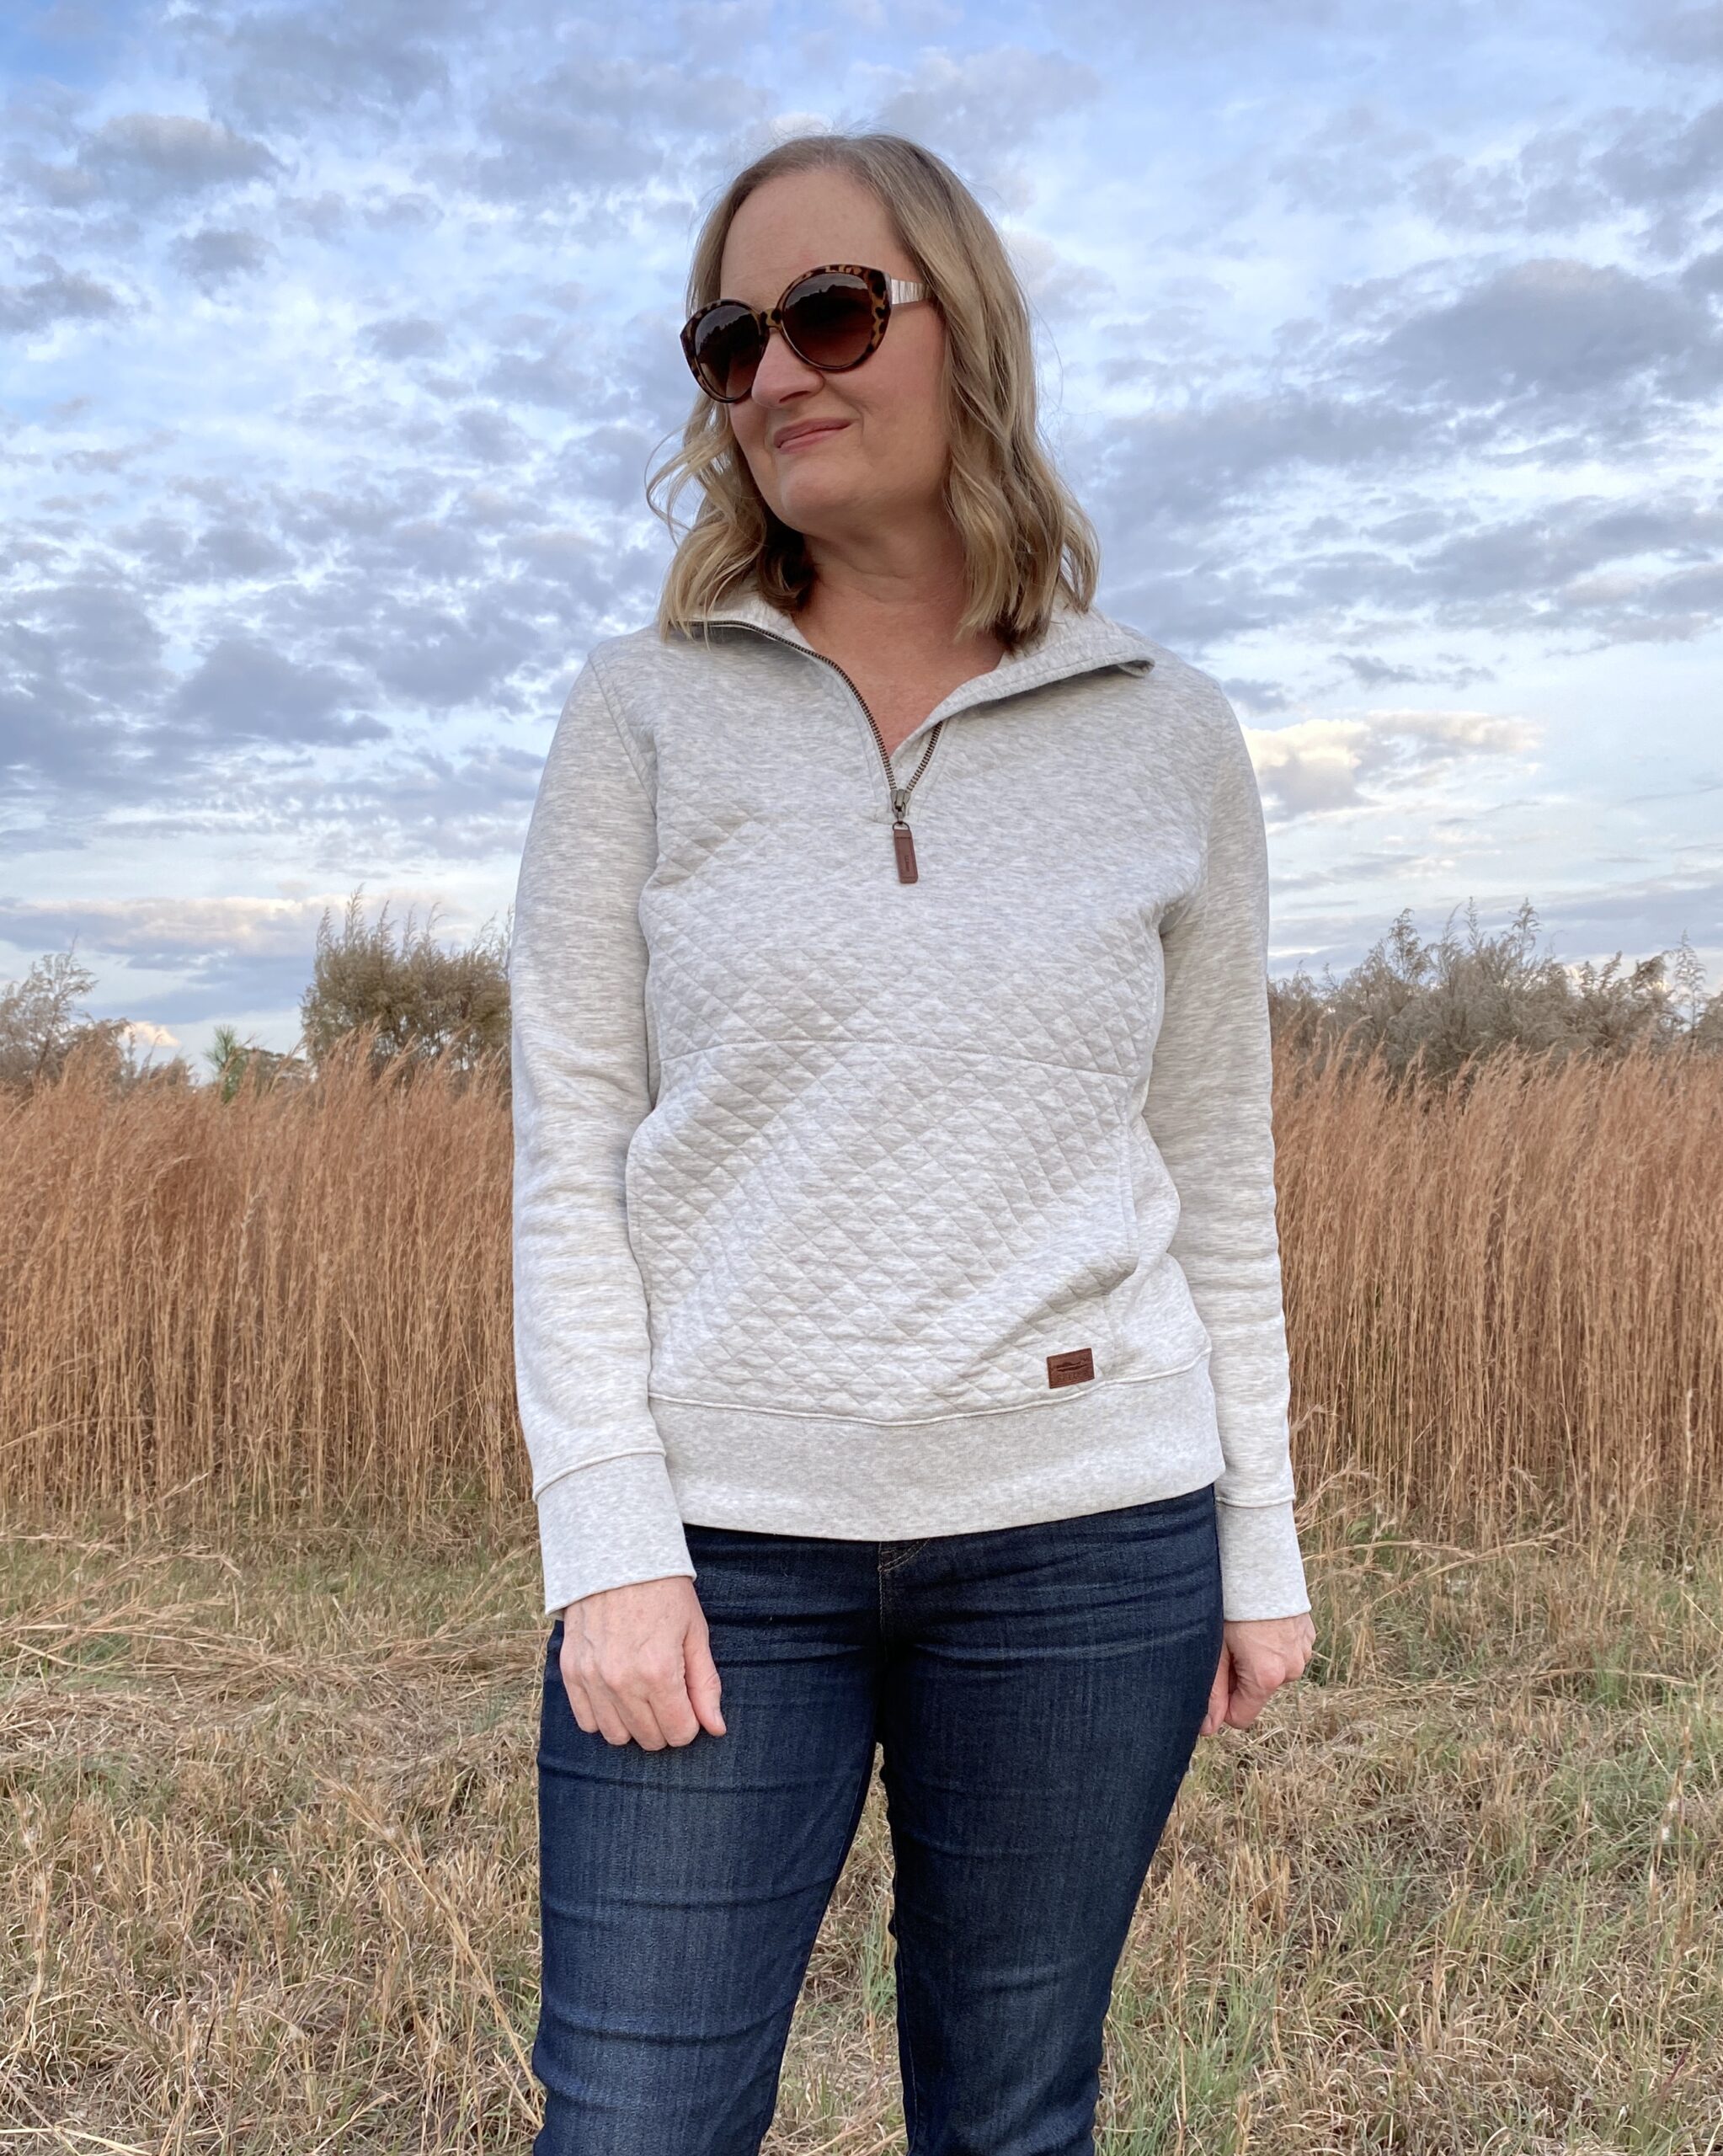 COMFY COZY NEUTRAL OUTFIT IDEAS FOR FALL — Me and Mr. Jones